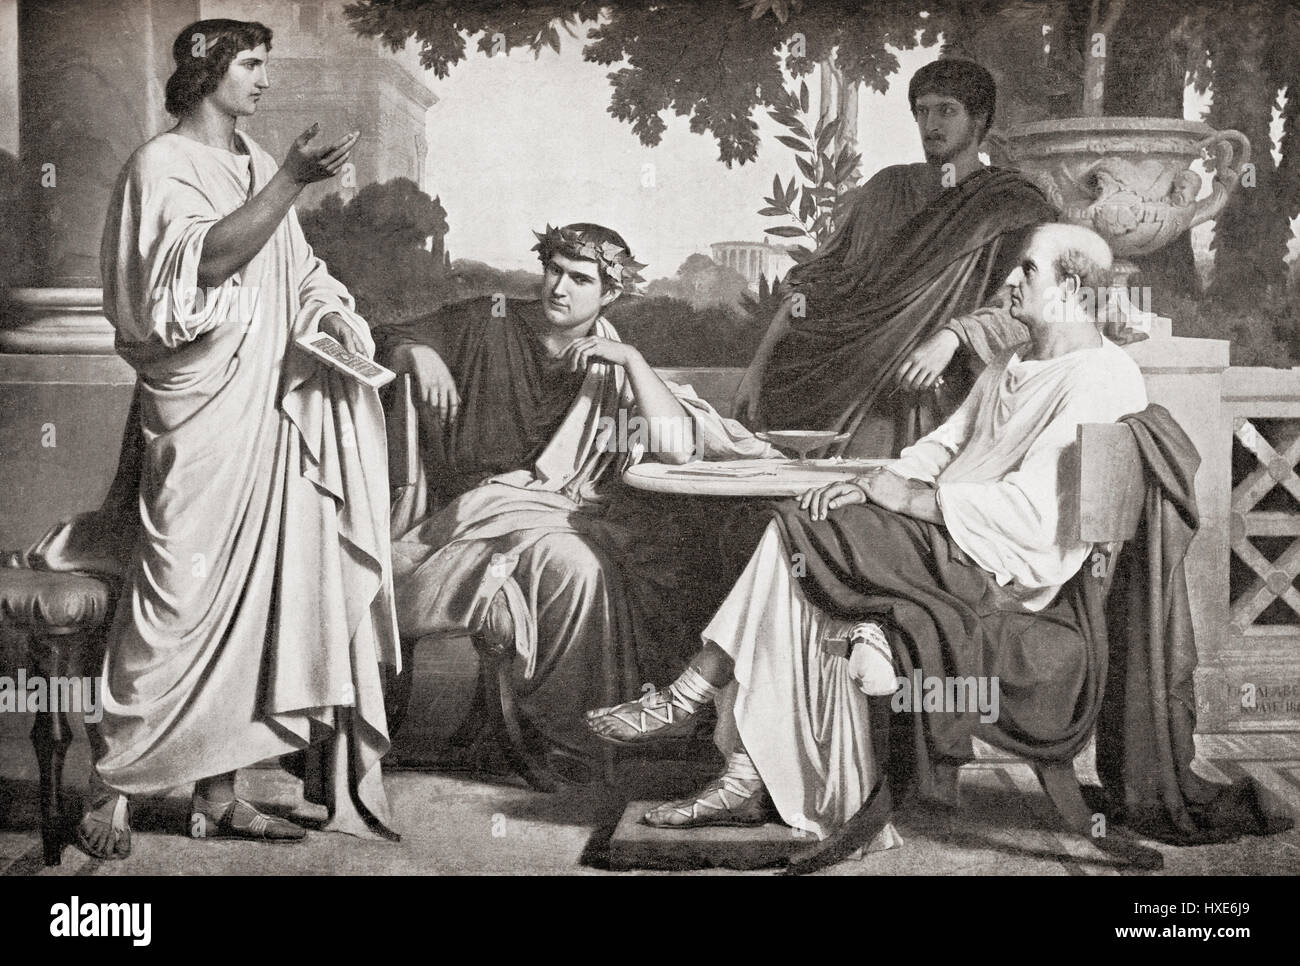 Left to right, Virgil, Horace and Varius at the House of Maecenas,(seated far right).  Publius Vergilius Maro, 70 BC – 19 BC, aka Virgil or Vergil. Ancient Roman poet of the Augustan period. Quintus Horatius Flaccus, 65 BC –  8 BC, aka Horace.  Roman lyric poet. Lucius Varius Rufus, c. 74 – 14 BC. Roman poet.  Gaius Cilnius Maecenas, 68 BC – 8 BC. Ally, friend and political advisor to Octavian and important patron for the new generation of Augustan poets.  From Hutchinson's History of the Nations, published 1915. Stock Photo